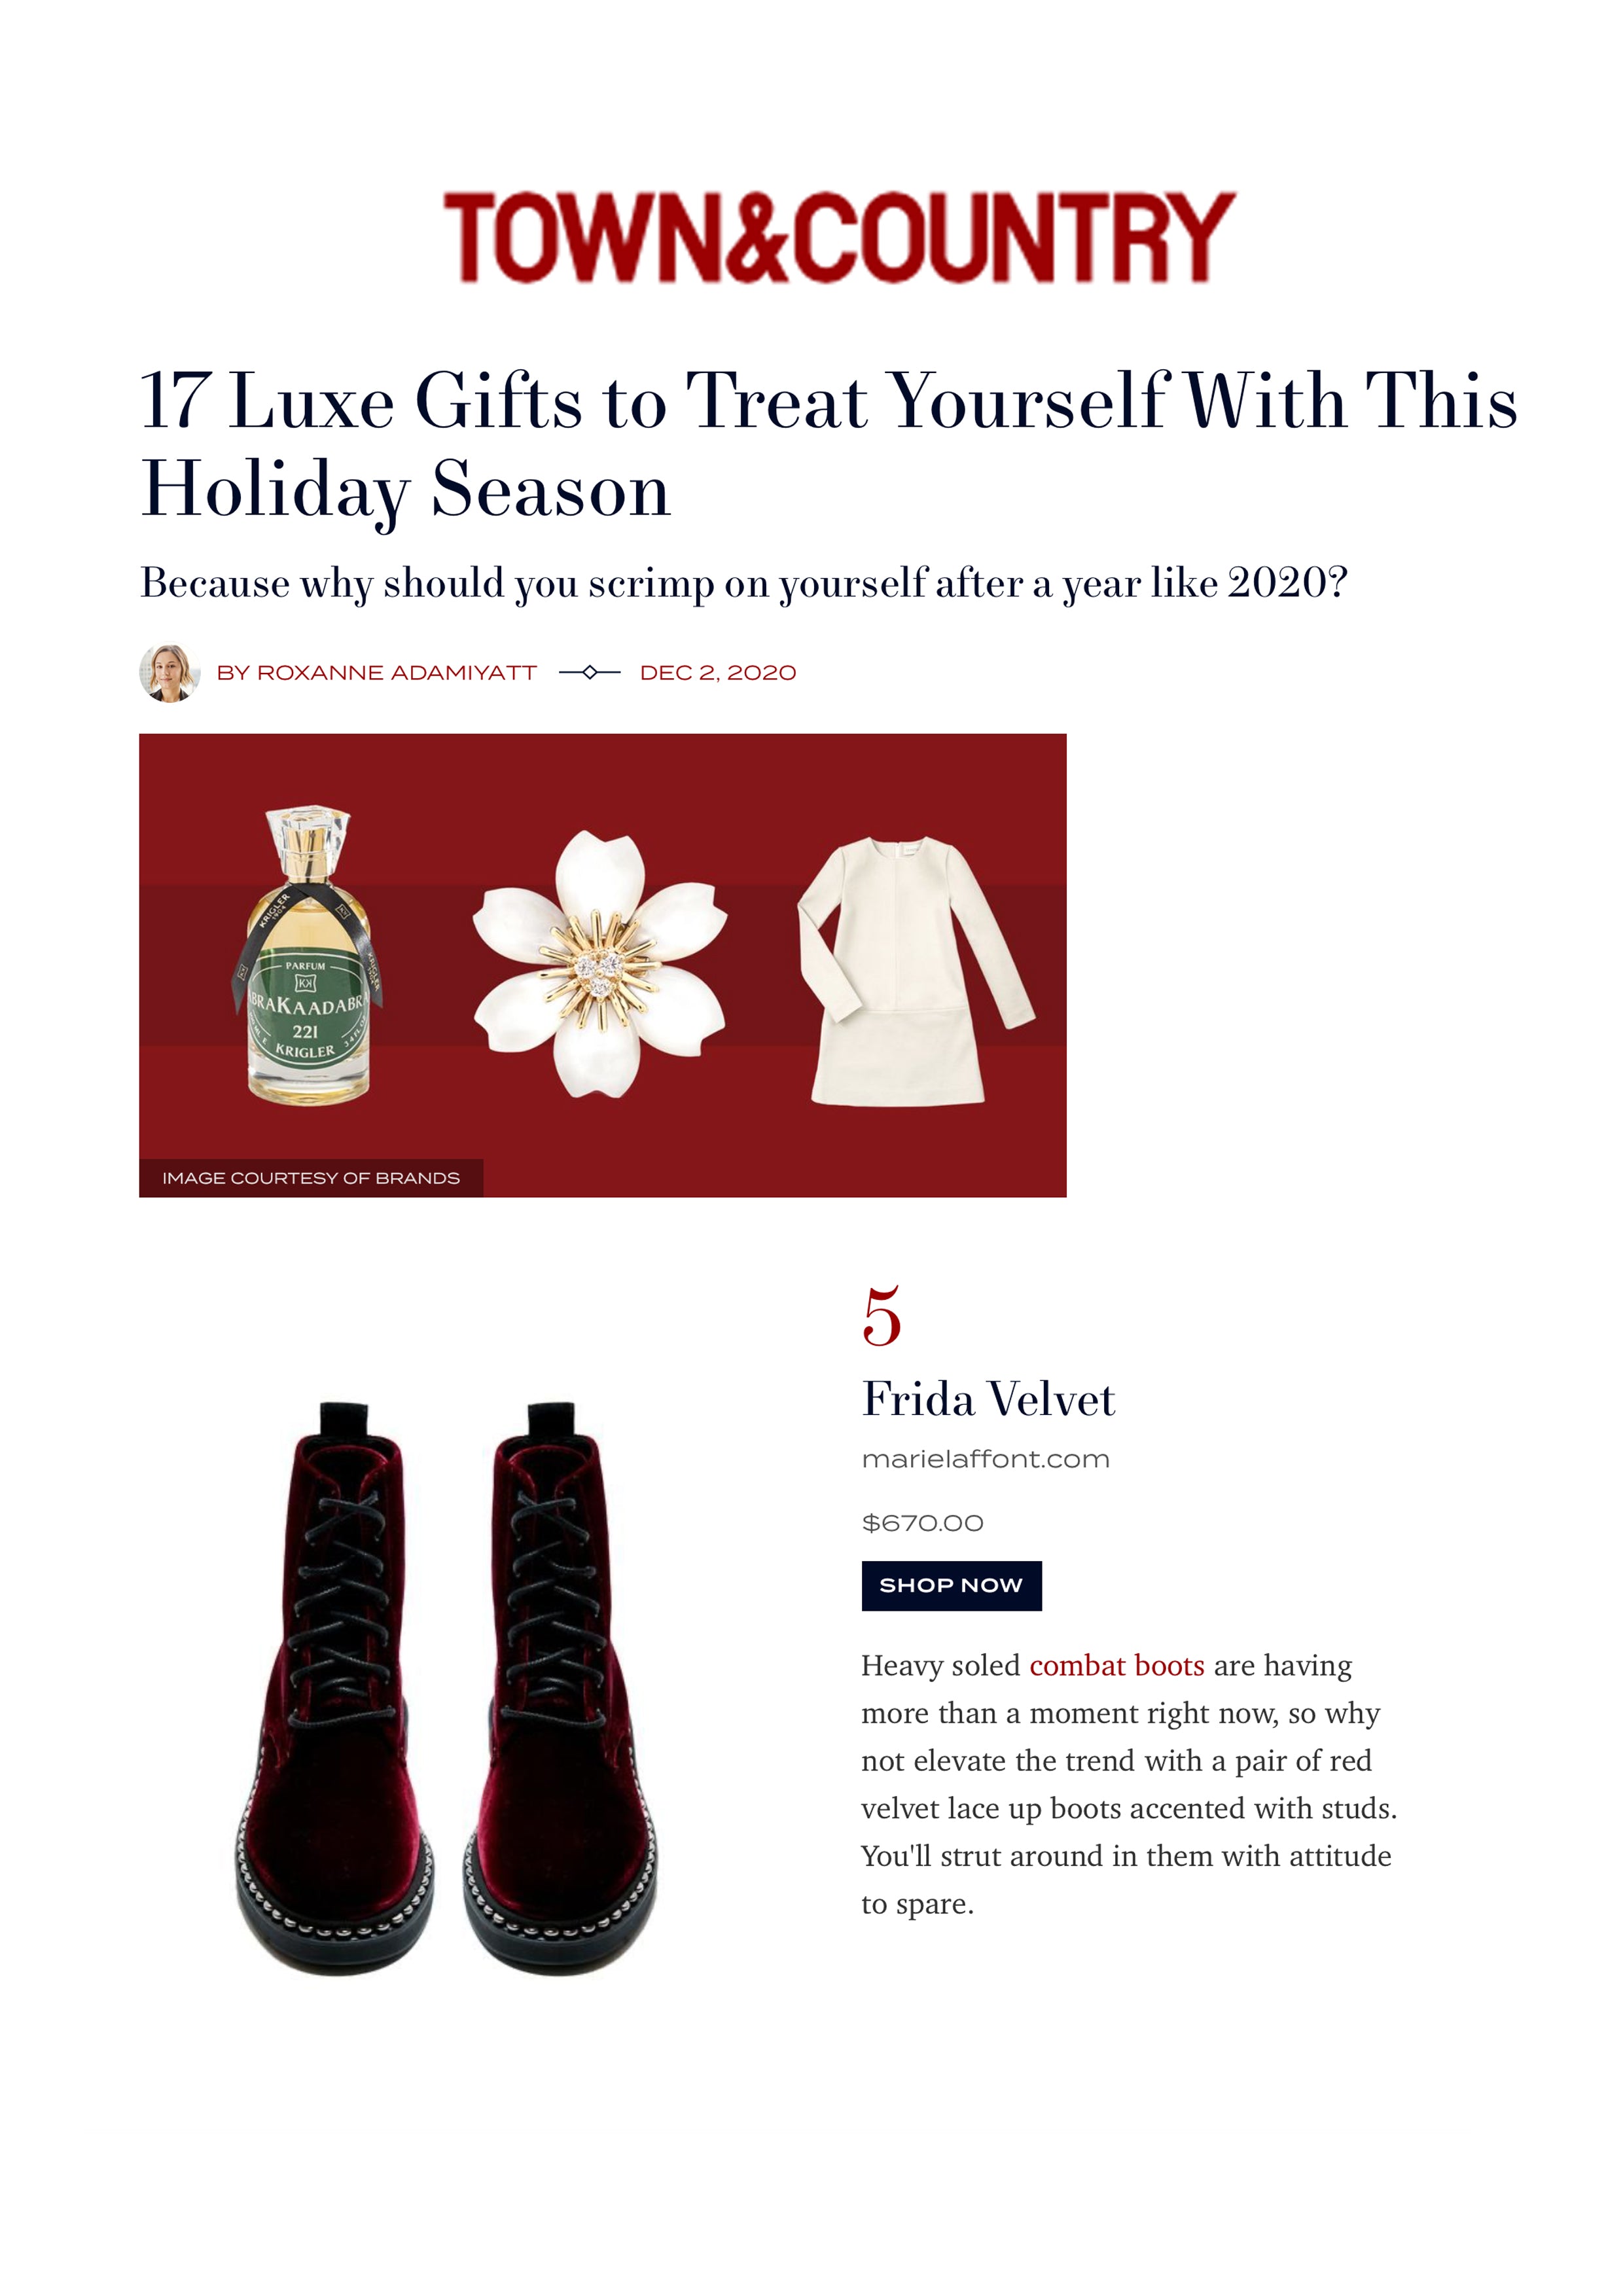 https://www.townandcountrymag.com/style/g34825013/gifts-to-give-yourself-holiday-2020/